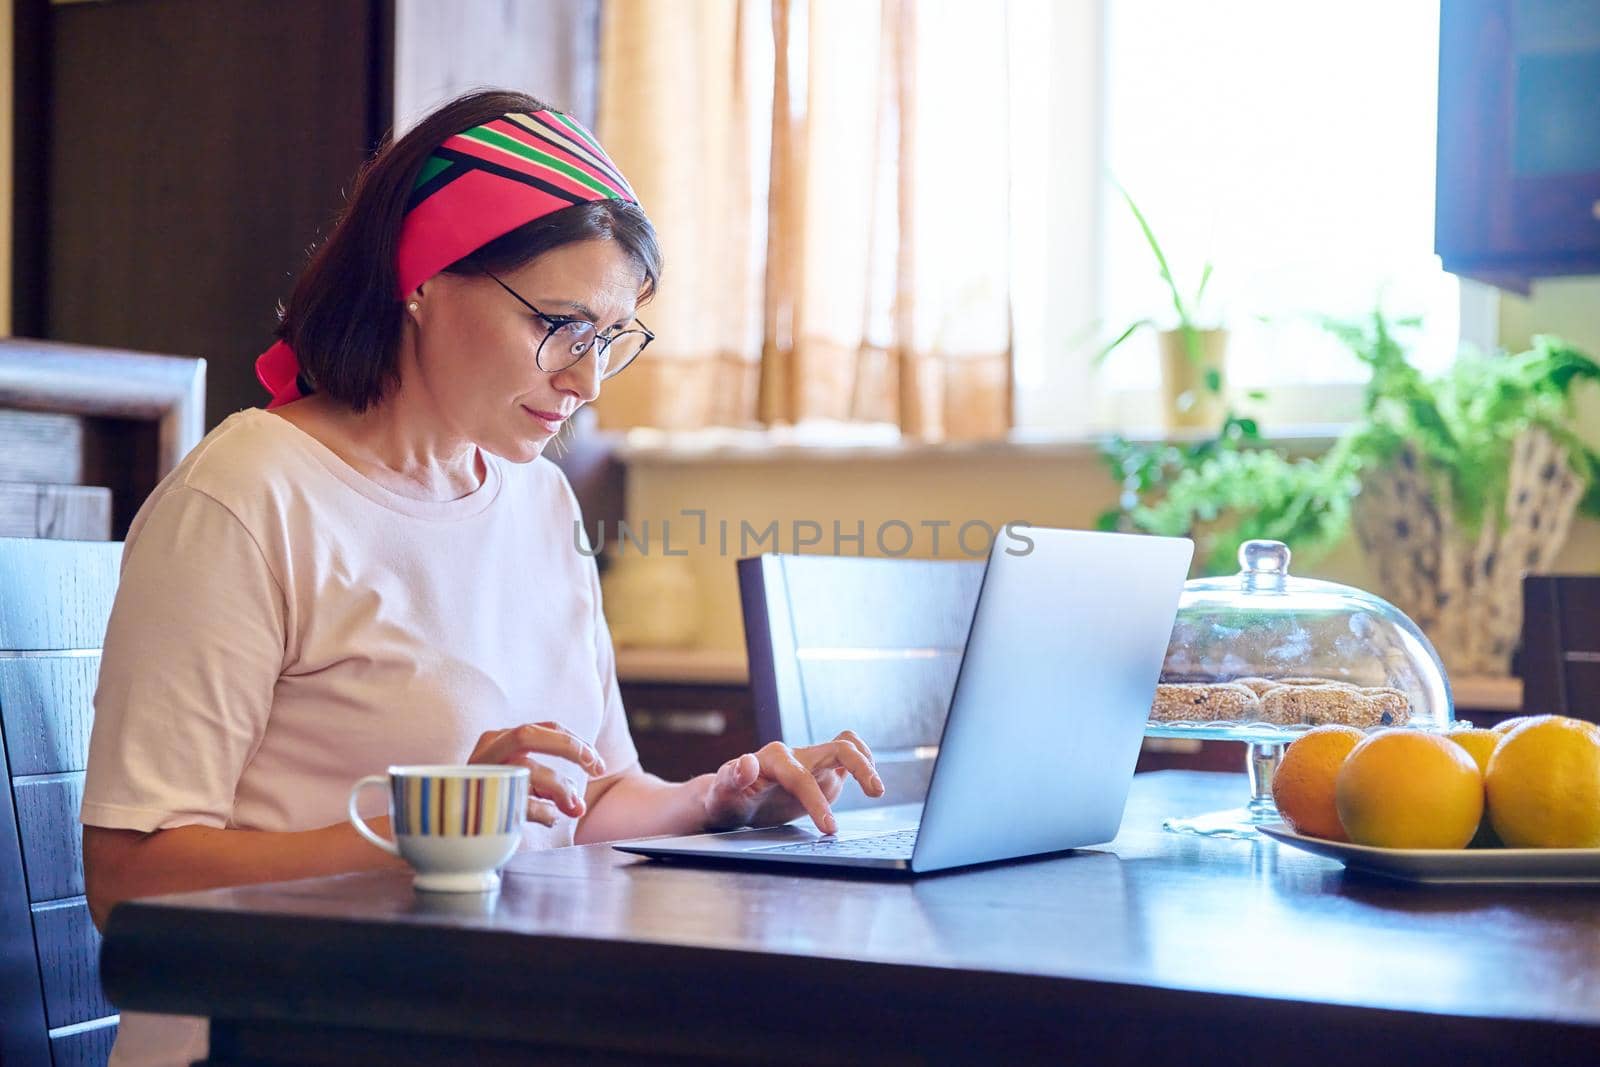 Middle-aged woman sitting at home in kitchen with laptop and cup of coffee. Lifestyle, leisure, technology, work, relaxation, mature people concept